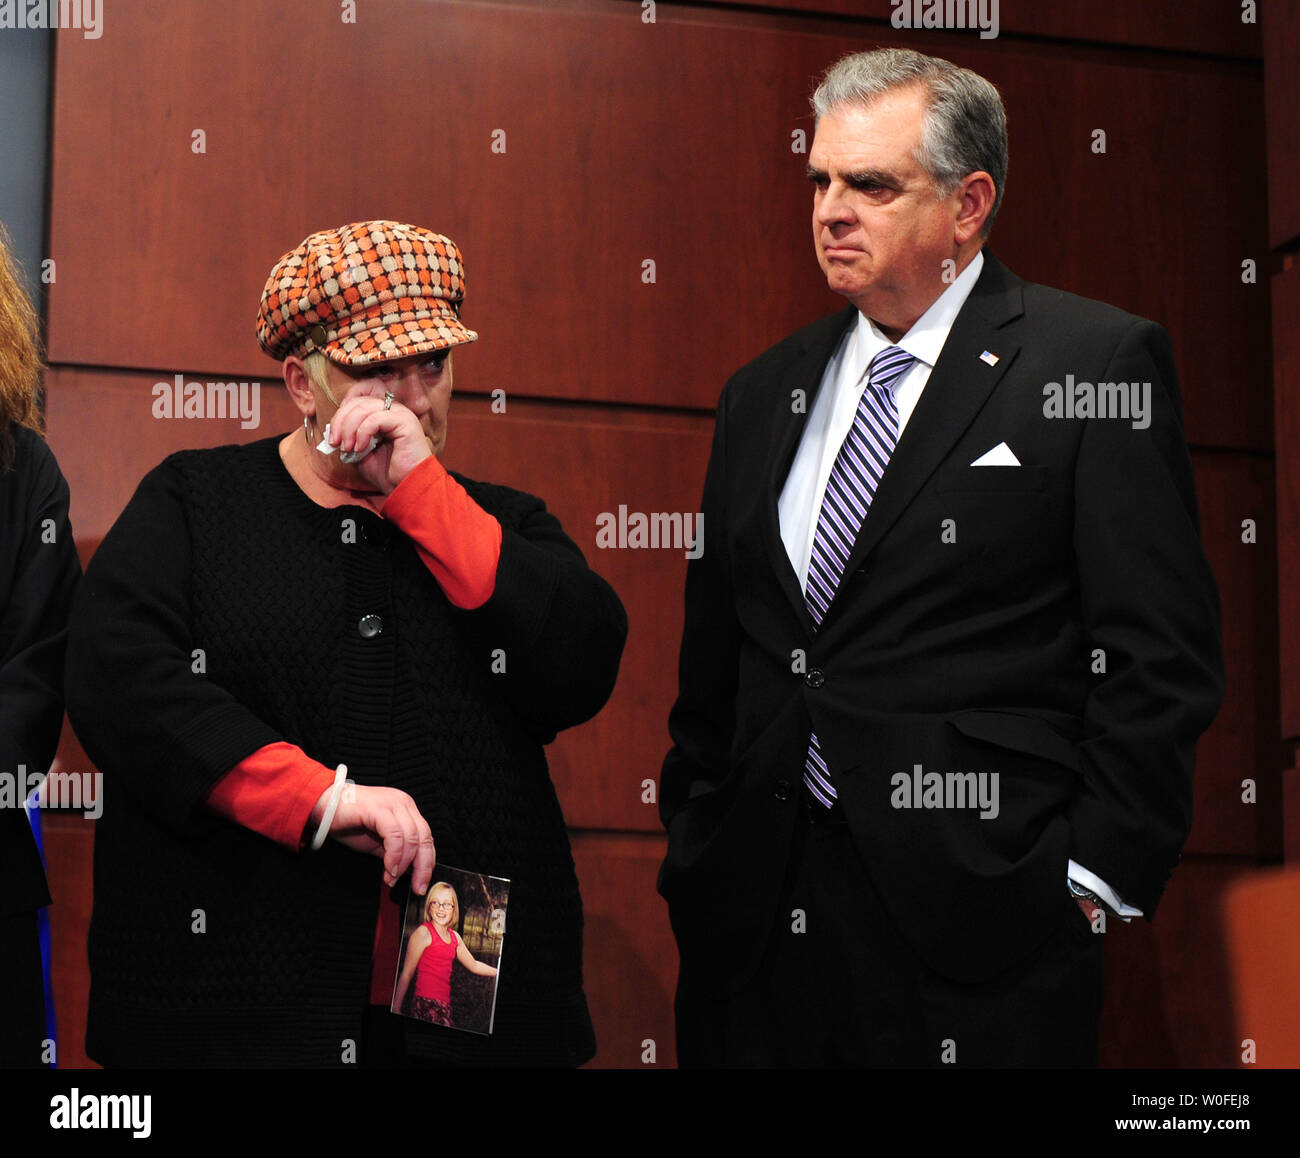 Transportation Secretary Ray LaHood (L) stands next to Elissa Schee as she wipes tears from her eyes, holding a photo of her daughter Margay, 13, who was killed when a distracted semi truck driver crashed into her school bus, during a press conference on distracted driving at the Transportation Department in Washington on January 12, 2010. LaHood introduced a new non-profit anti-distracted driving program called Focus Driven Initiative. UPI/Kevin Dietsch Stock Photo